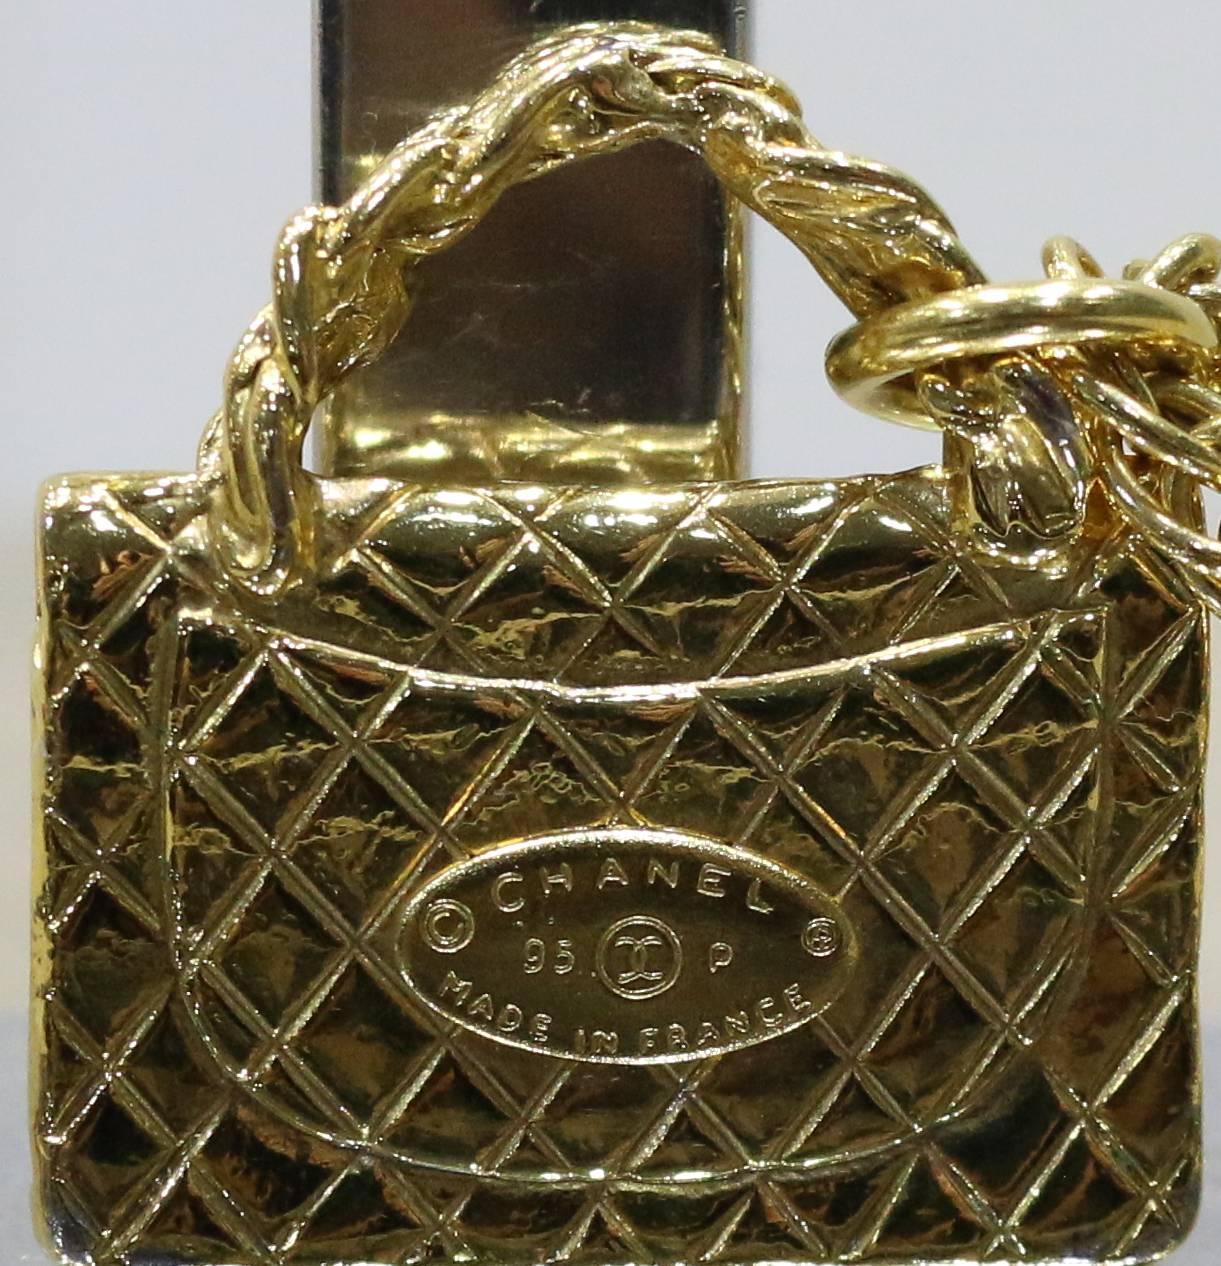 - Chanel gold toned classic quilted flap bag charm pendant necklace from 1995 collection. Featuring a gold toned strand link effect chain with clasp fastening. This is a truly vintage collectible item especially with such a cute little classic